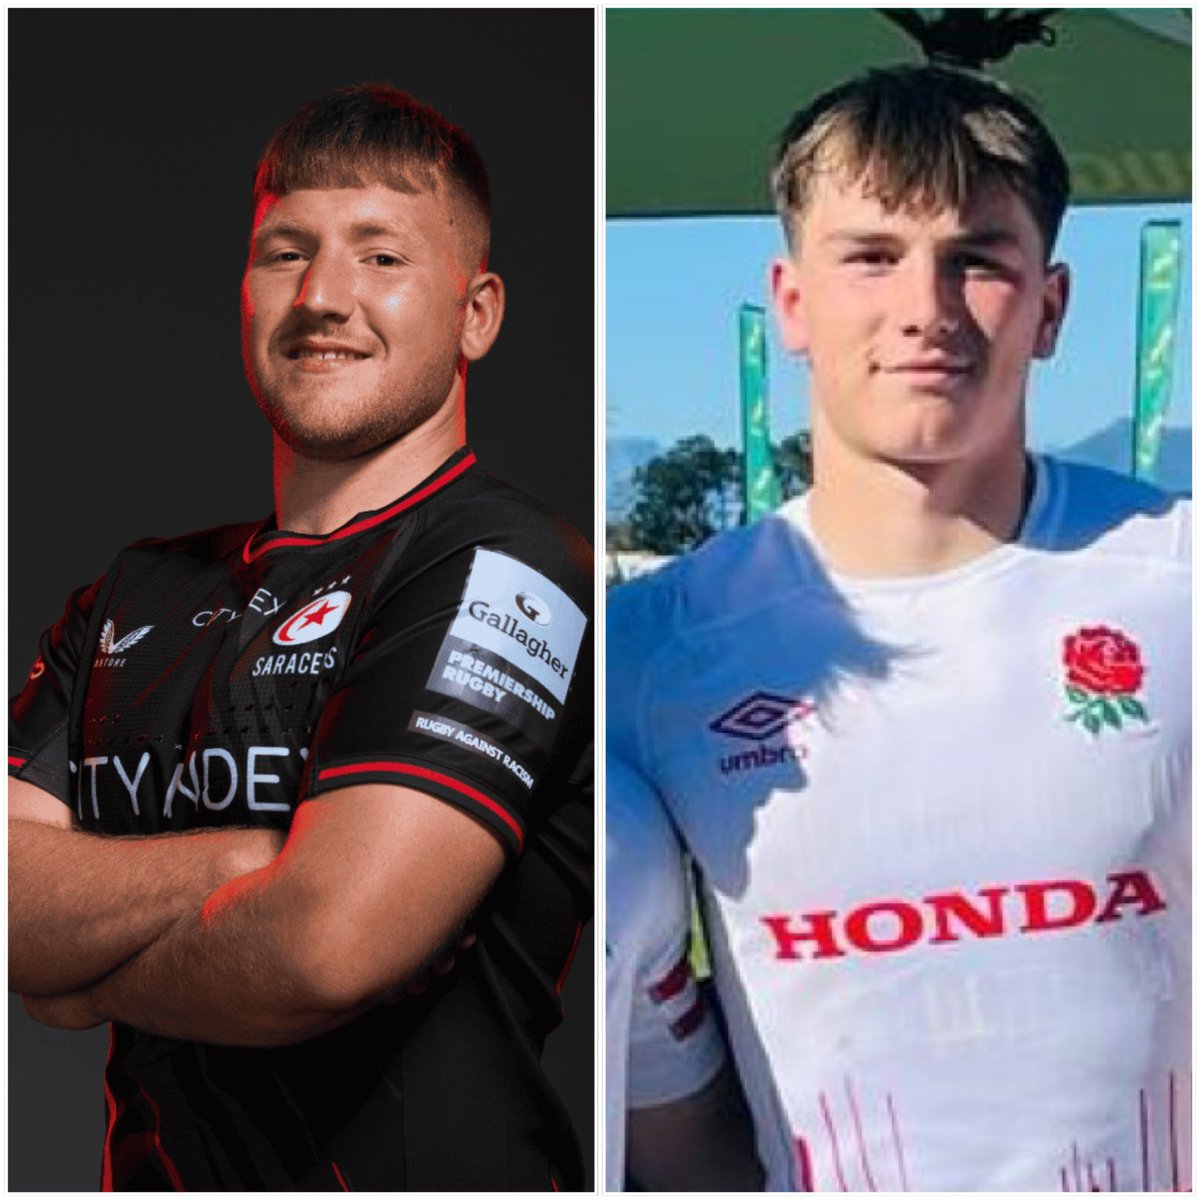 Good luck to Saracens Academy’s James Isaacs and Angus Hall on being selected for the England U20 Men’s game 🆚 Coventry Rugby on Saturday. Good luck to them and all the squad. #SarriesFamily ⚫️🔴 @NextGenXV